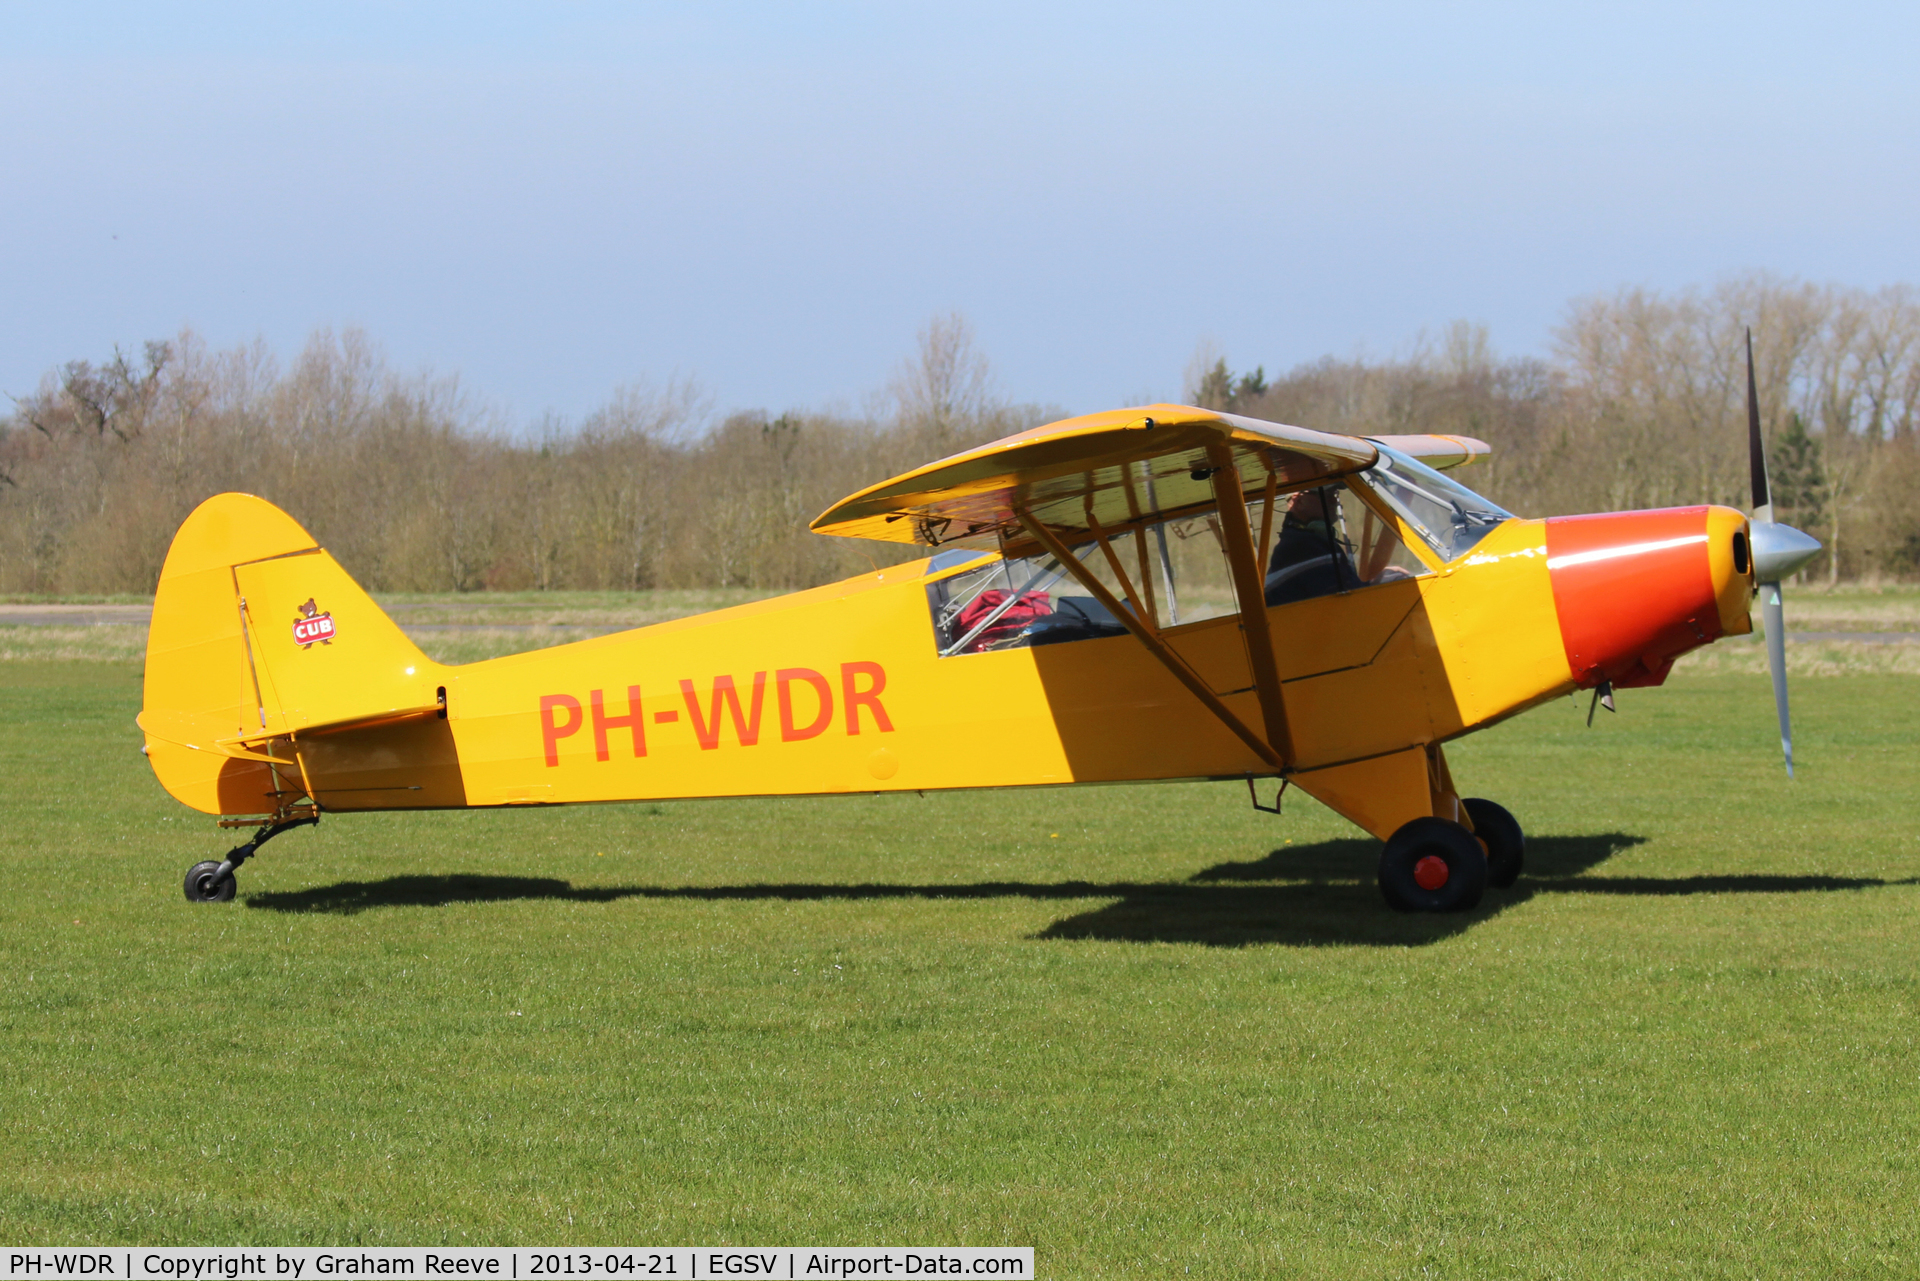 PH-WDR, 1954 Piper L-21B Super Cub (PA-18-135) C/N 18-3852, About to depart.